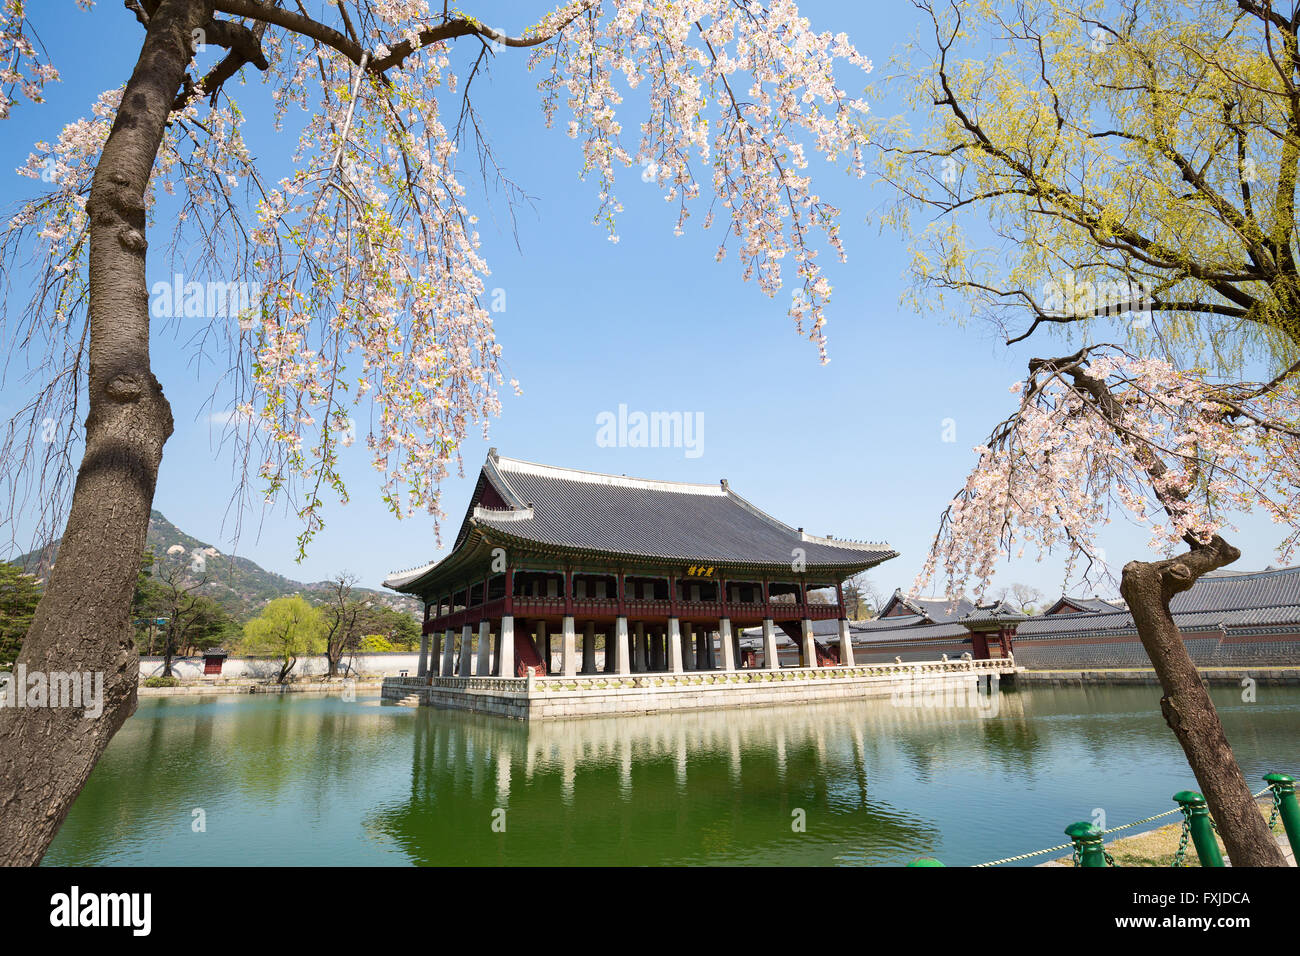 Gyeongbokgung Palace  in spring with cherry blossom Stock Photo